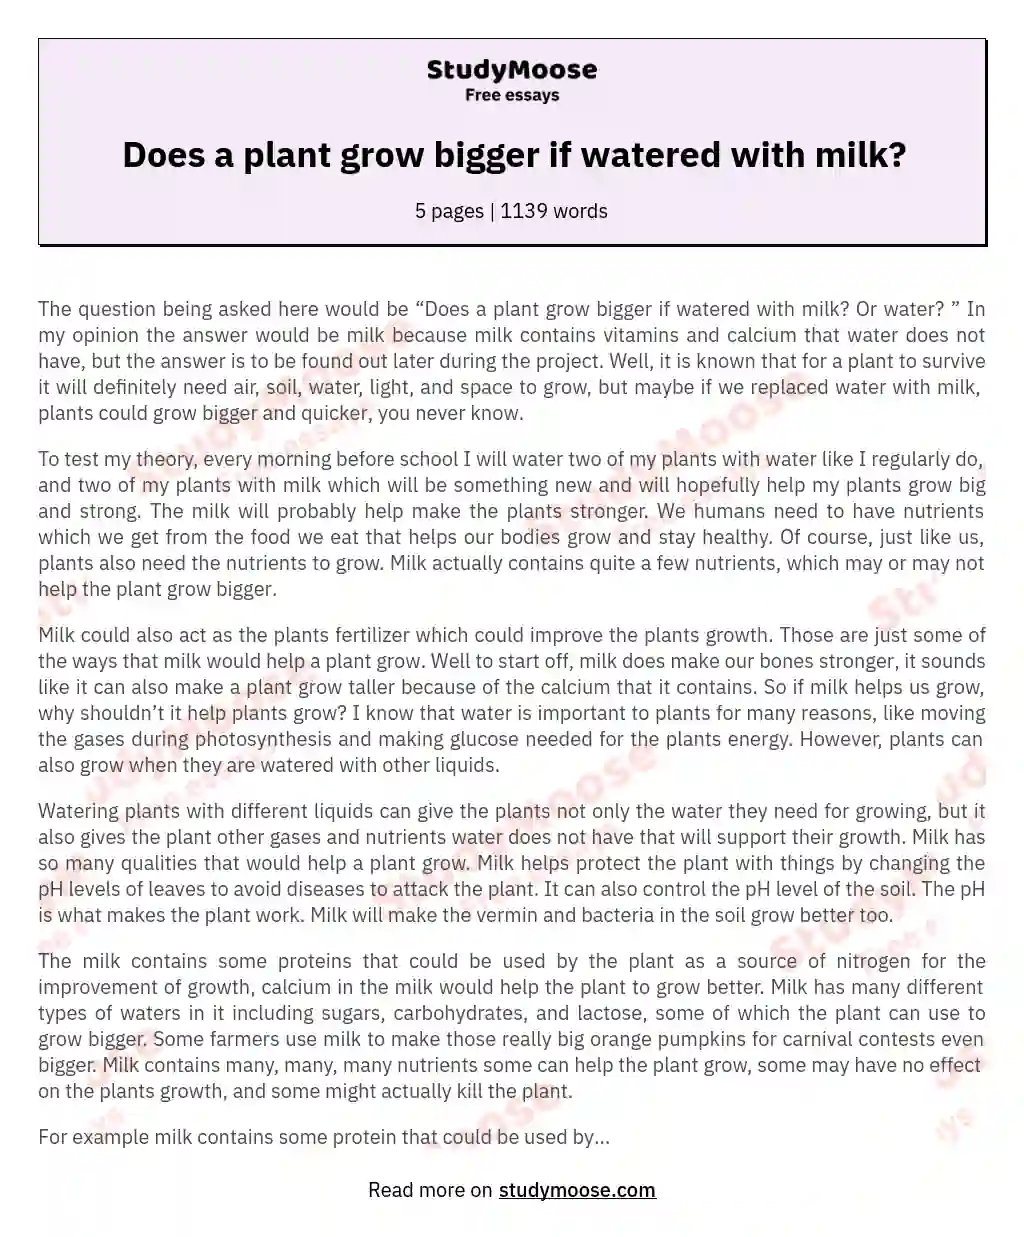 Milk: A Potential Growth Booster for Plants essay